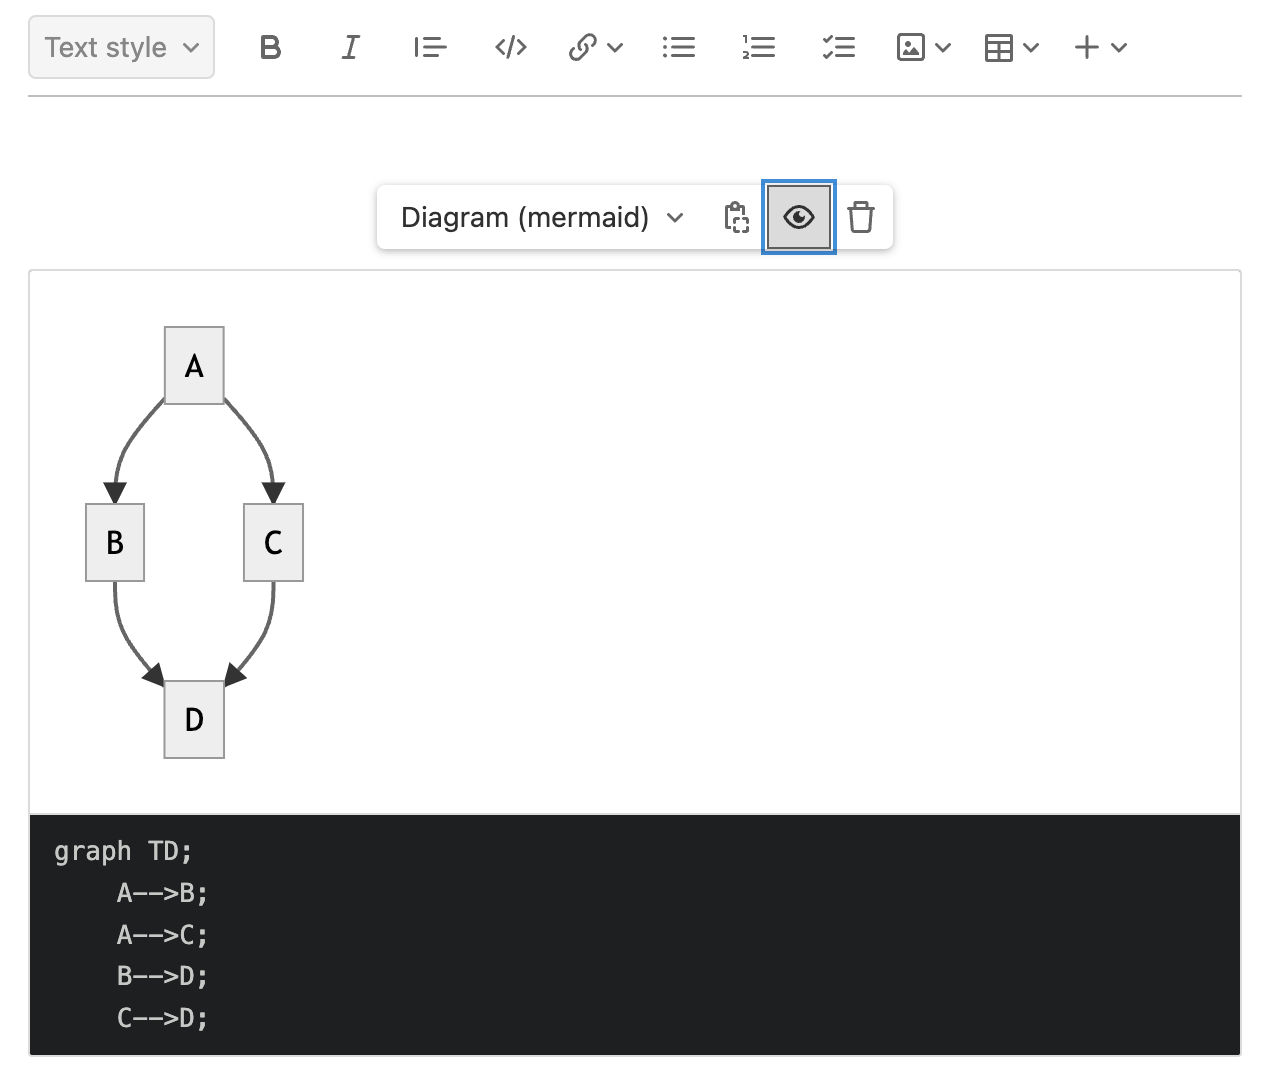 Live preview diagrams in the wiki WYSIWYG editor